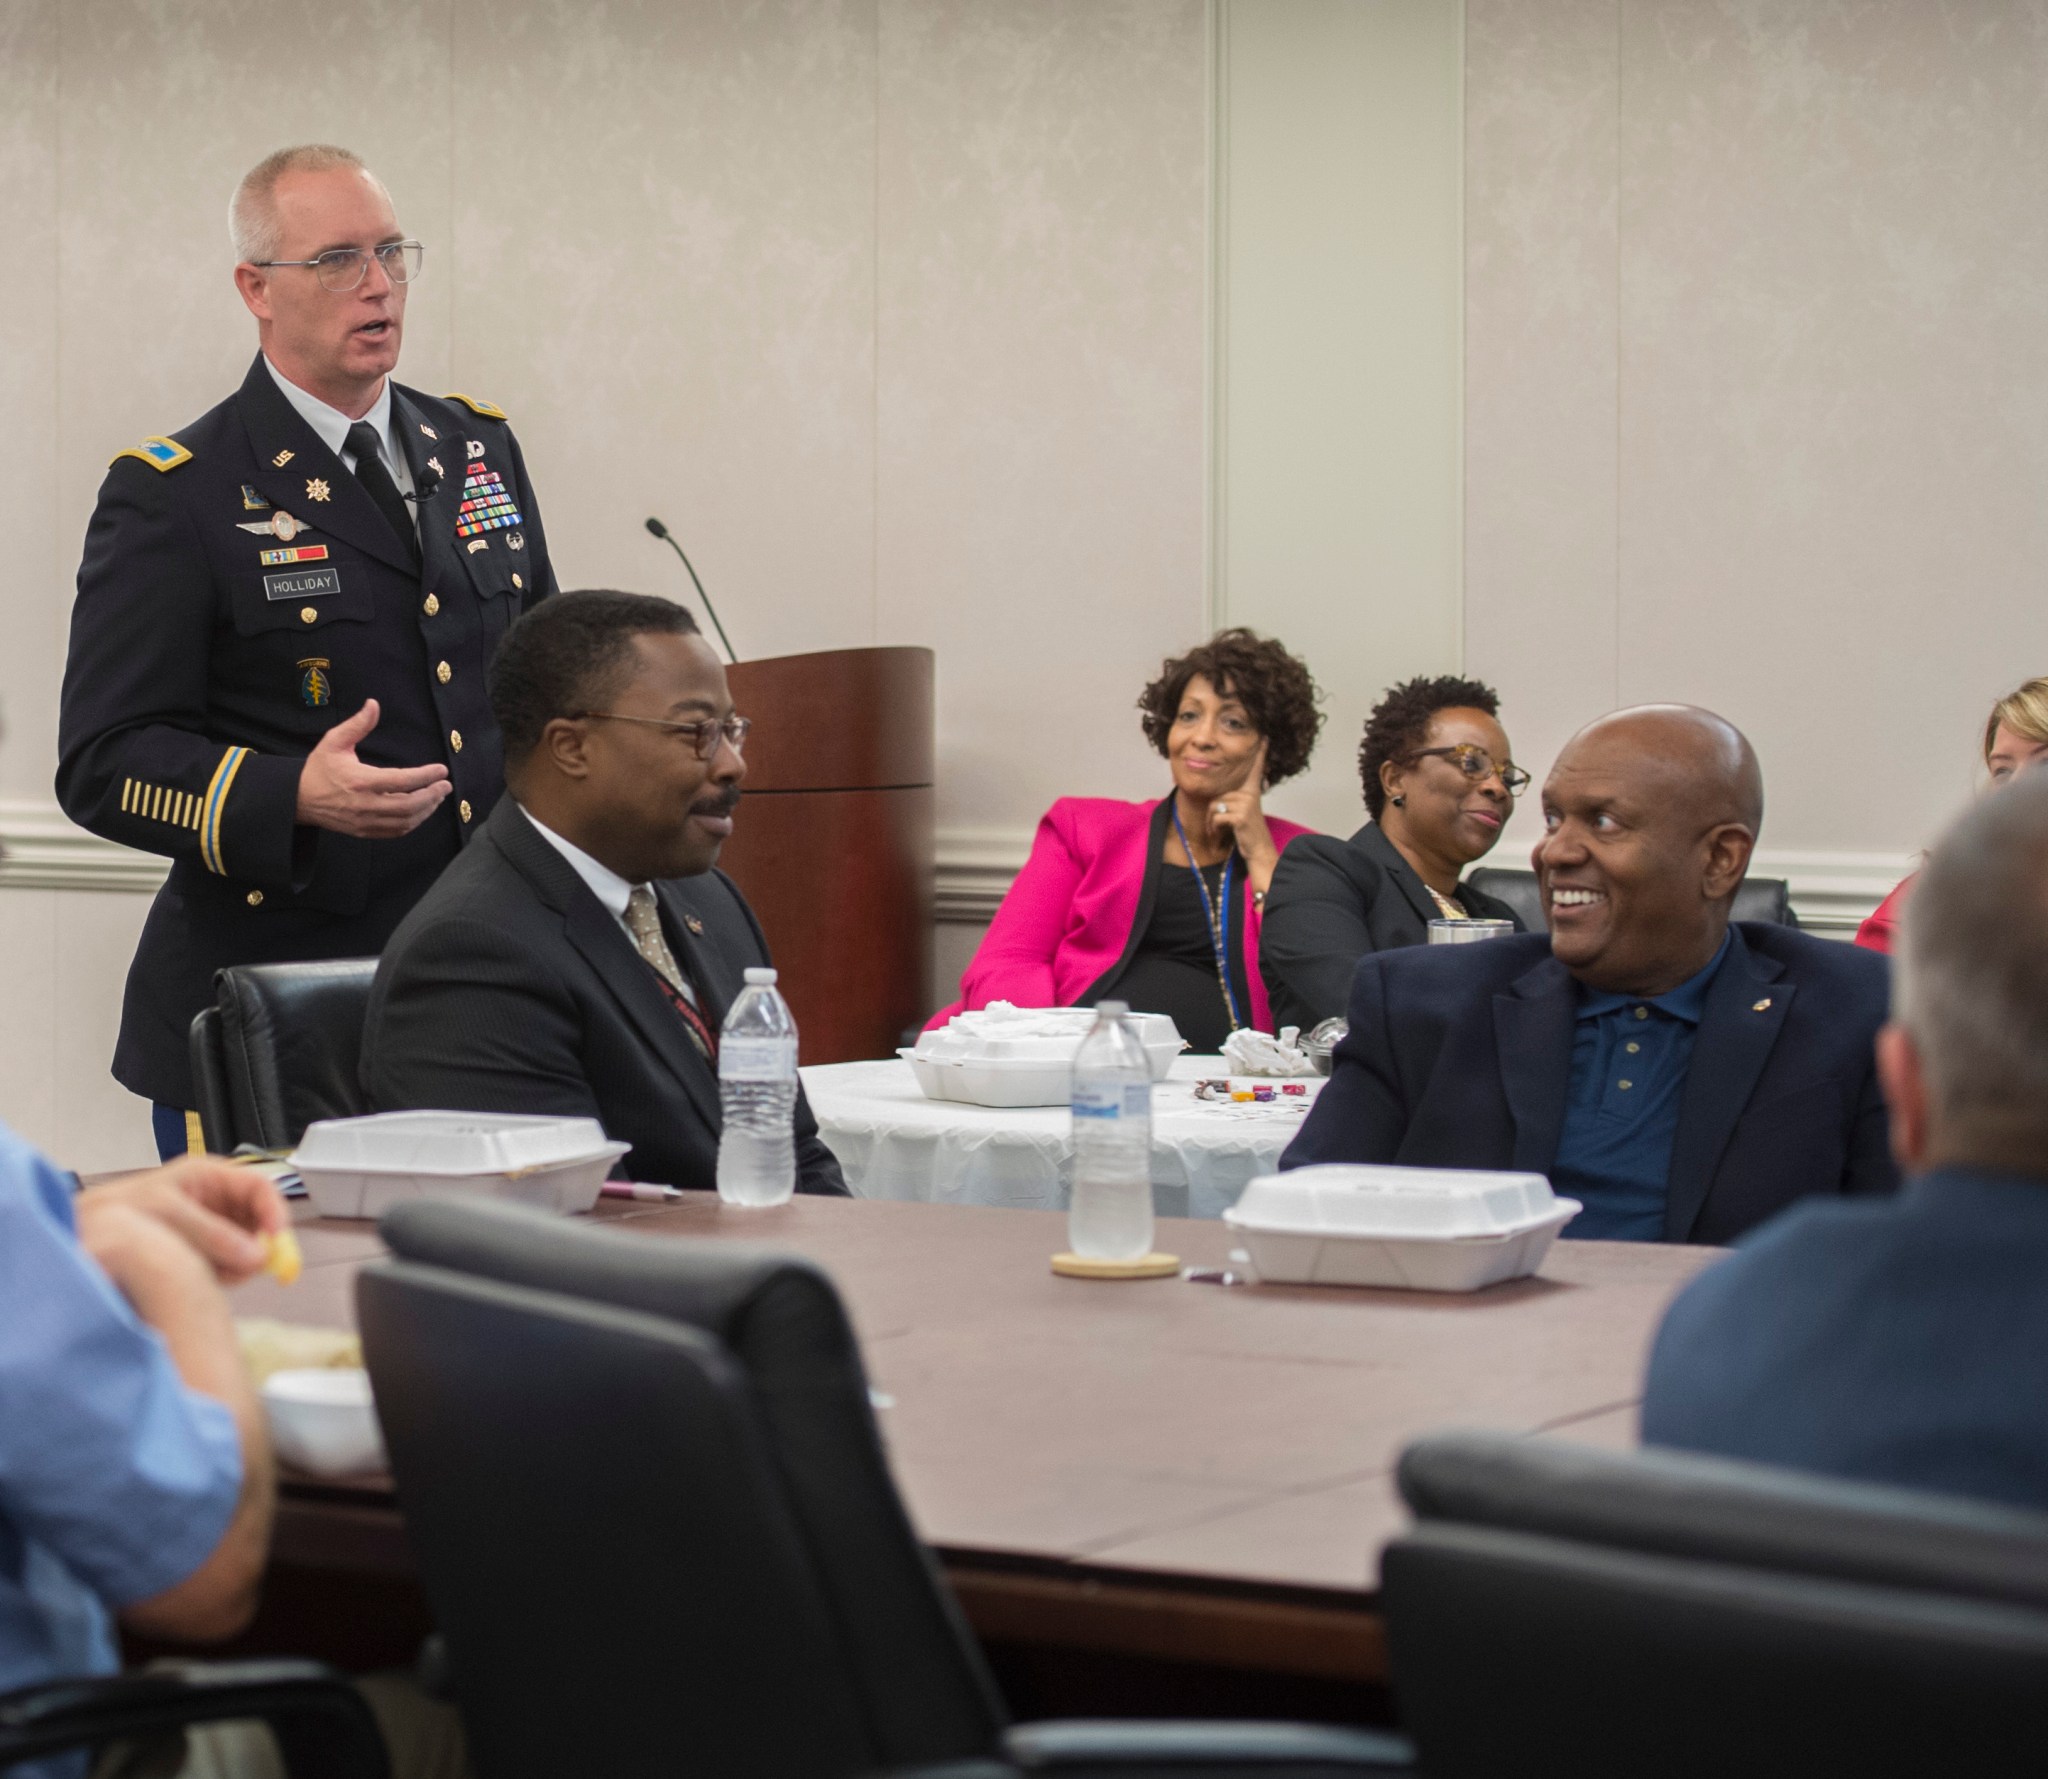 U.S. Army Col. Thomas Holliday Jr., Garrison Commander at Redstone Arsenal, spoke at the Marshall Association luncheon Sept. 20 